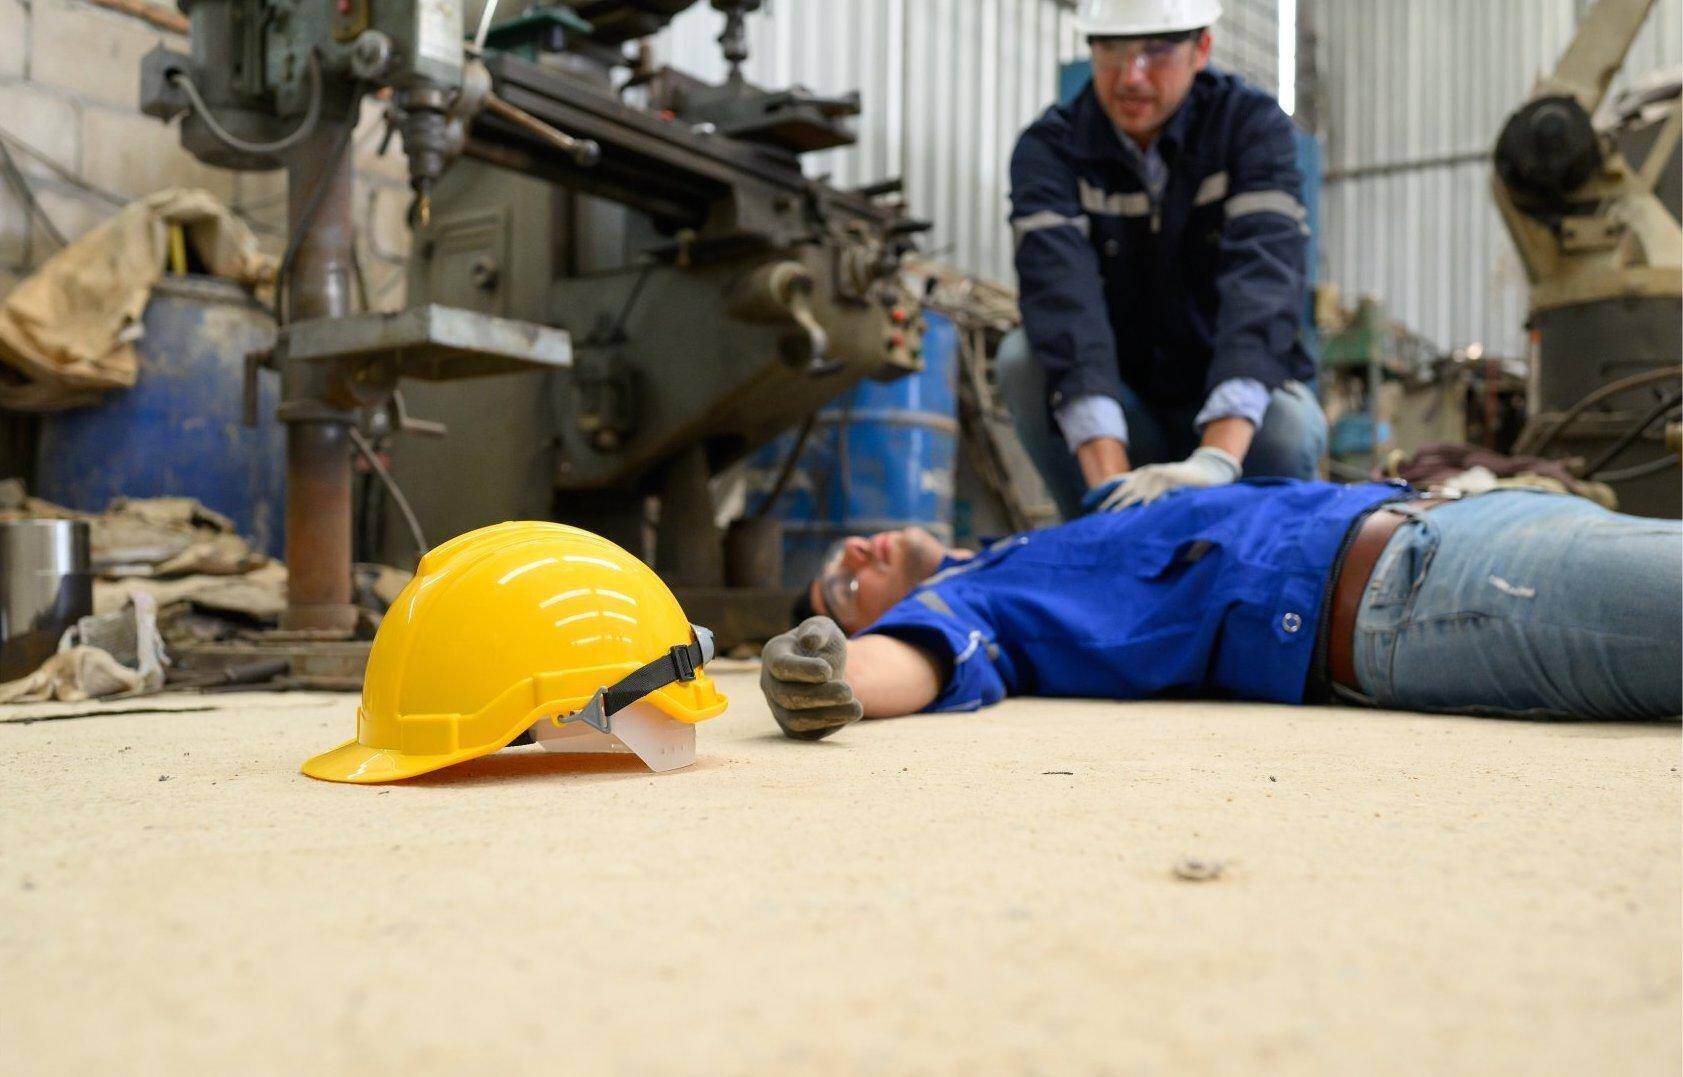 An unconscious man who has been injured on the job who will file for workers compensation in Savannah, Georgia